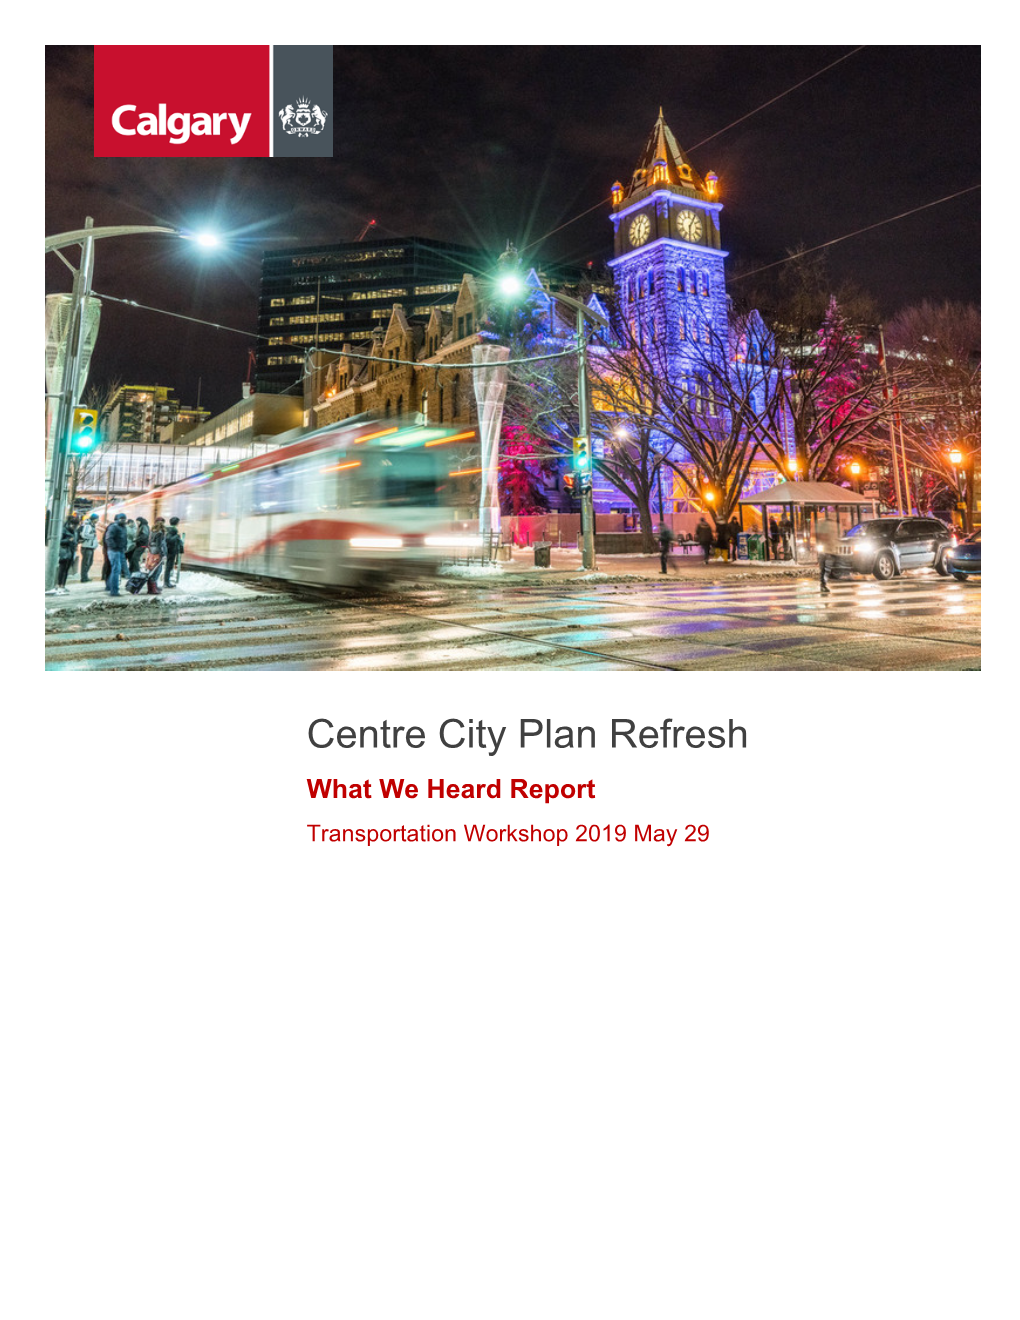 What We Heard Report Transportation Workshop 2019 May 29